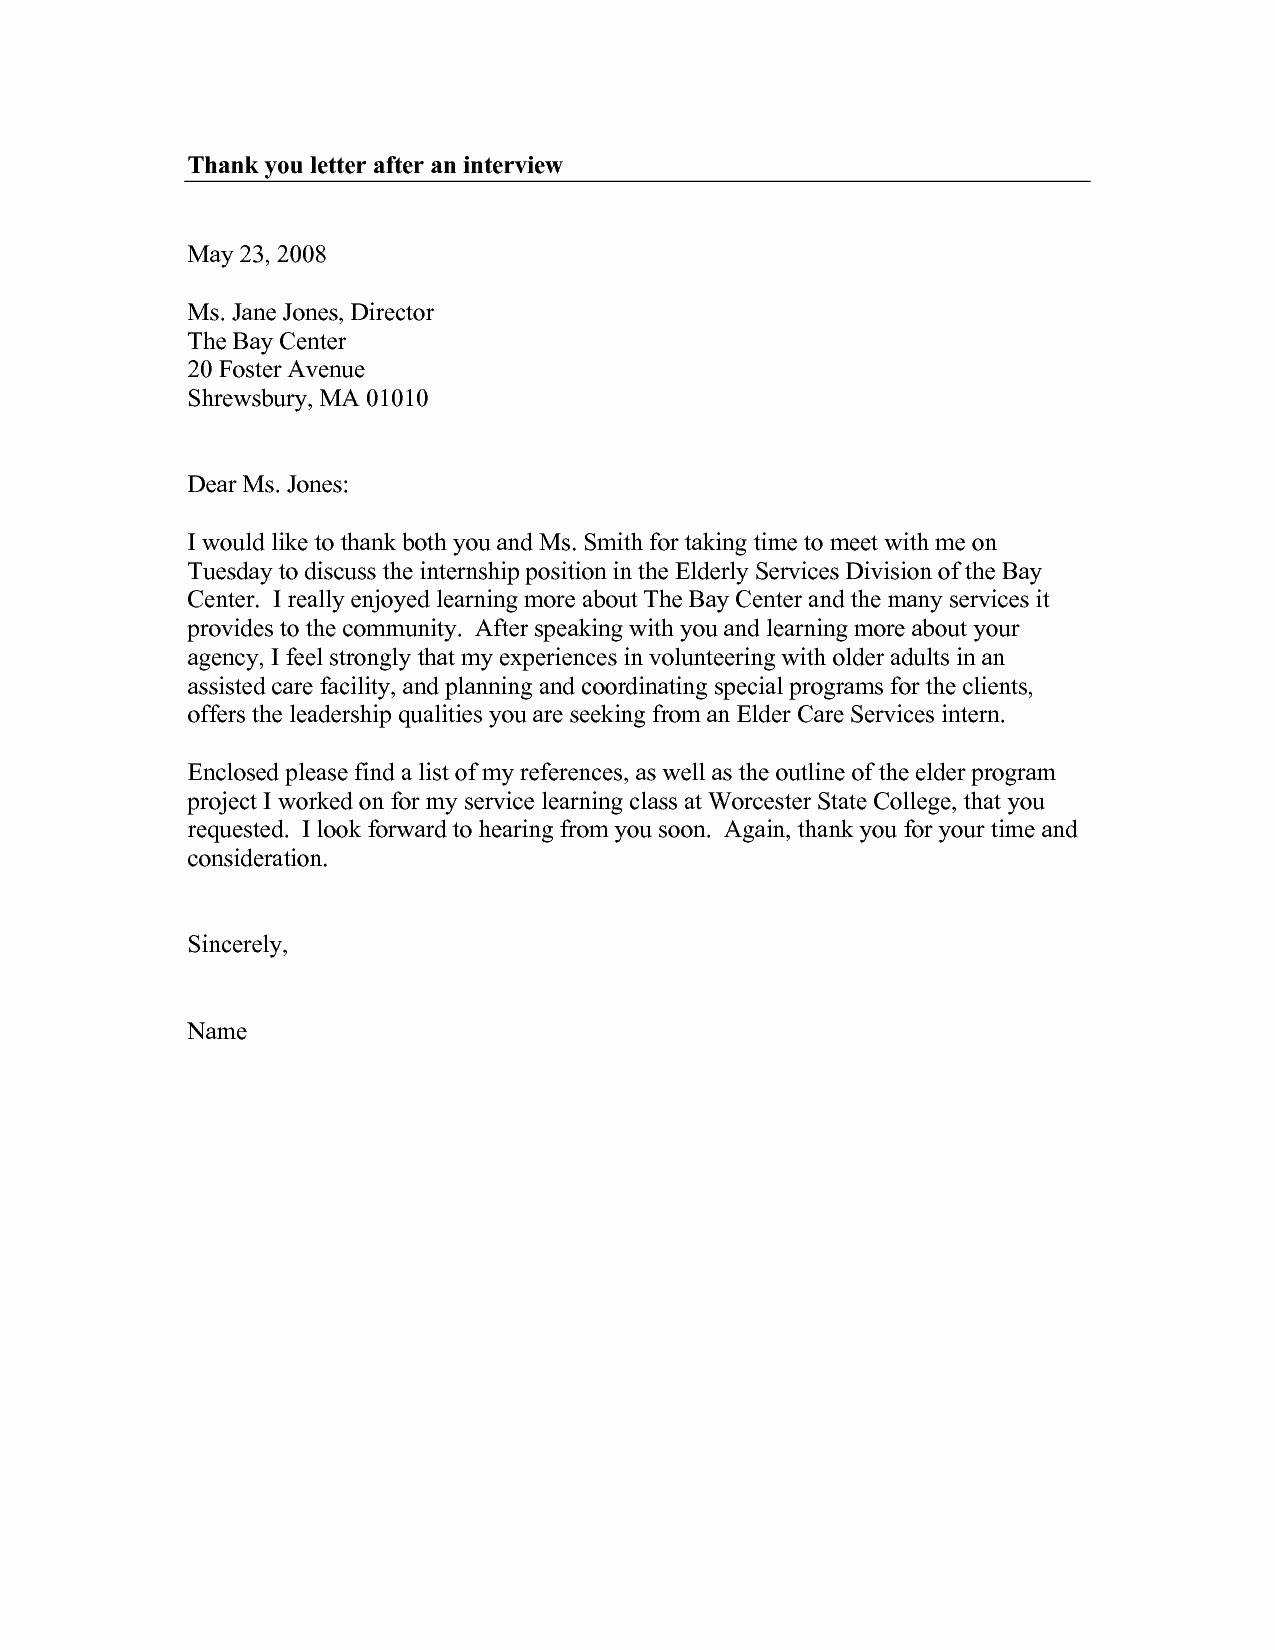 Medical School Interview Thank You Letter Unique Best S Of the Letter after Interview Sample Thank